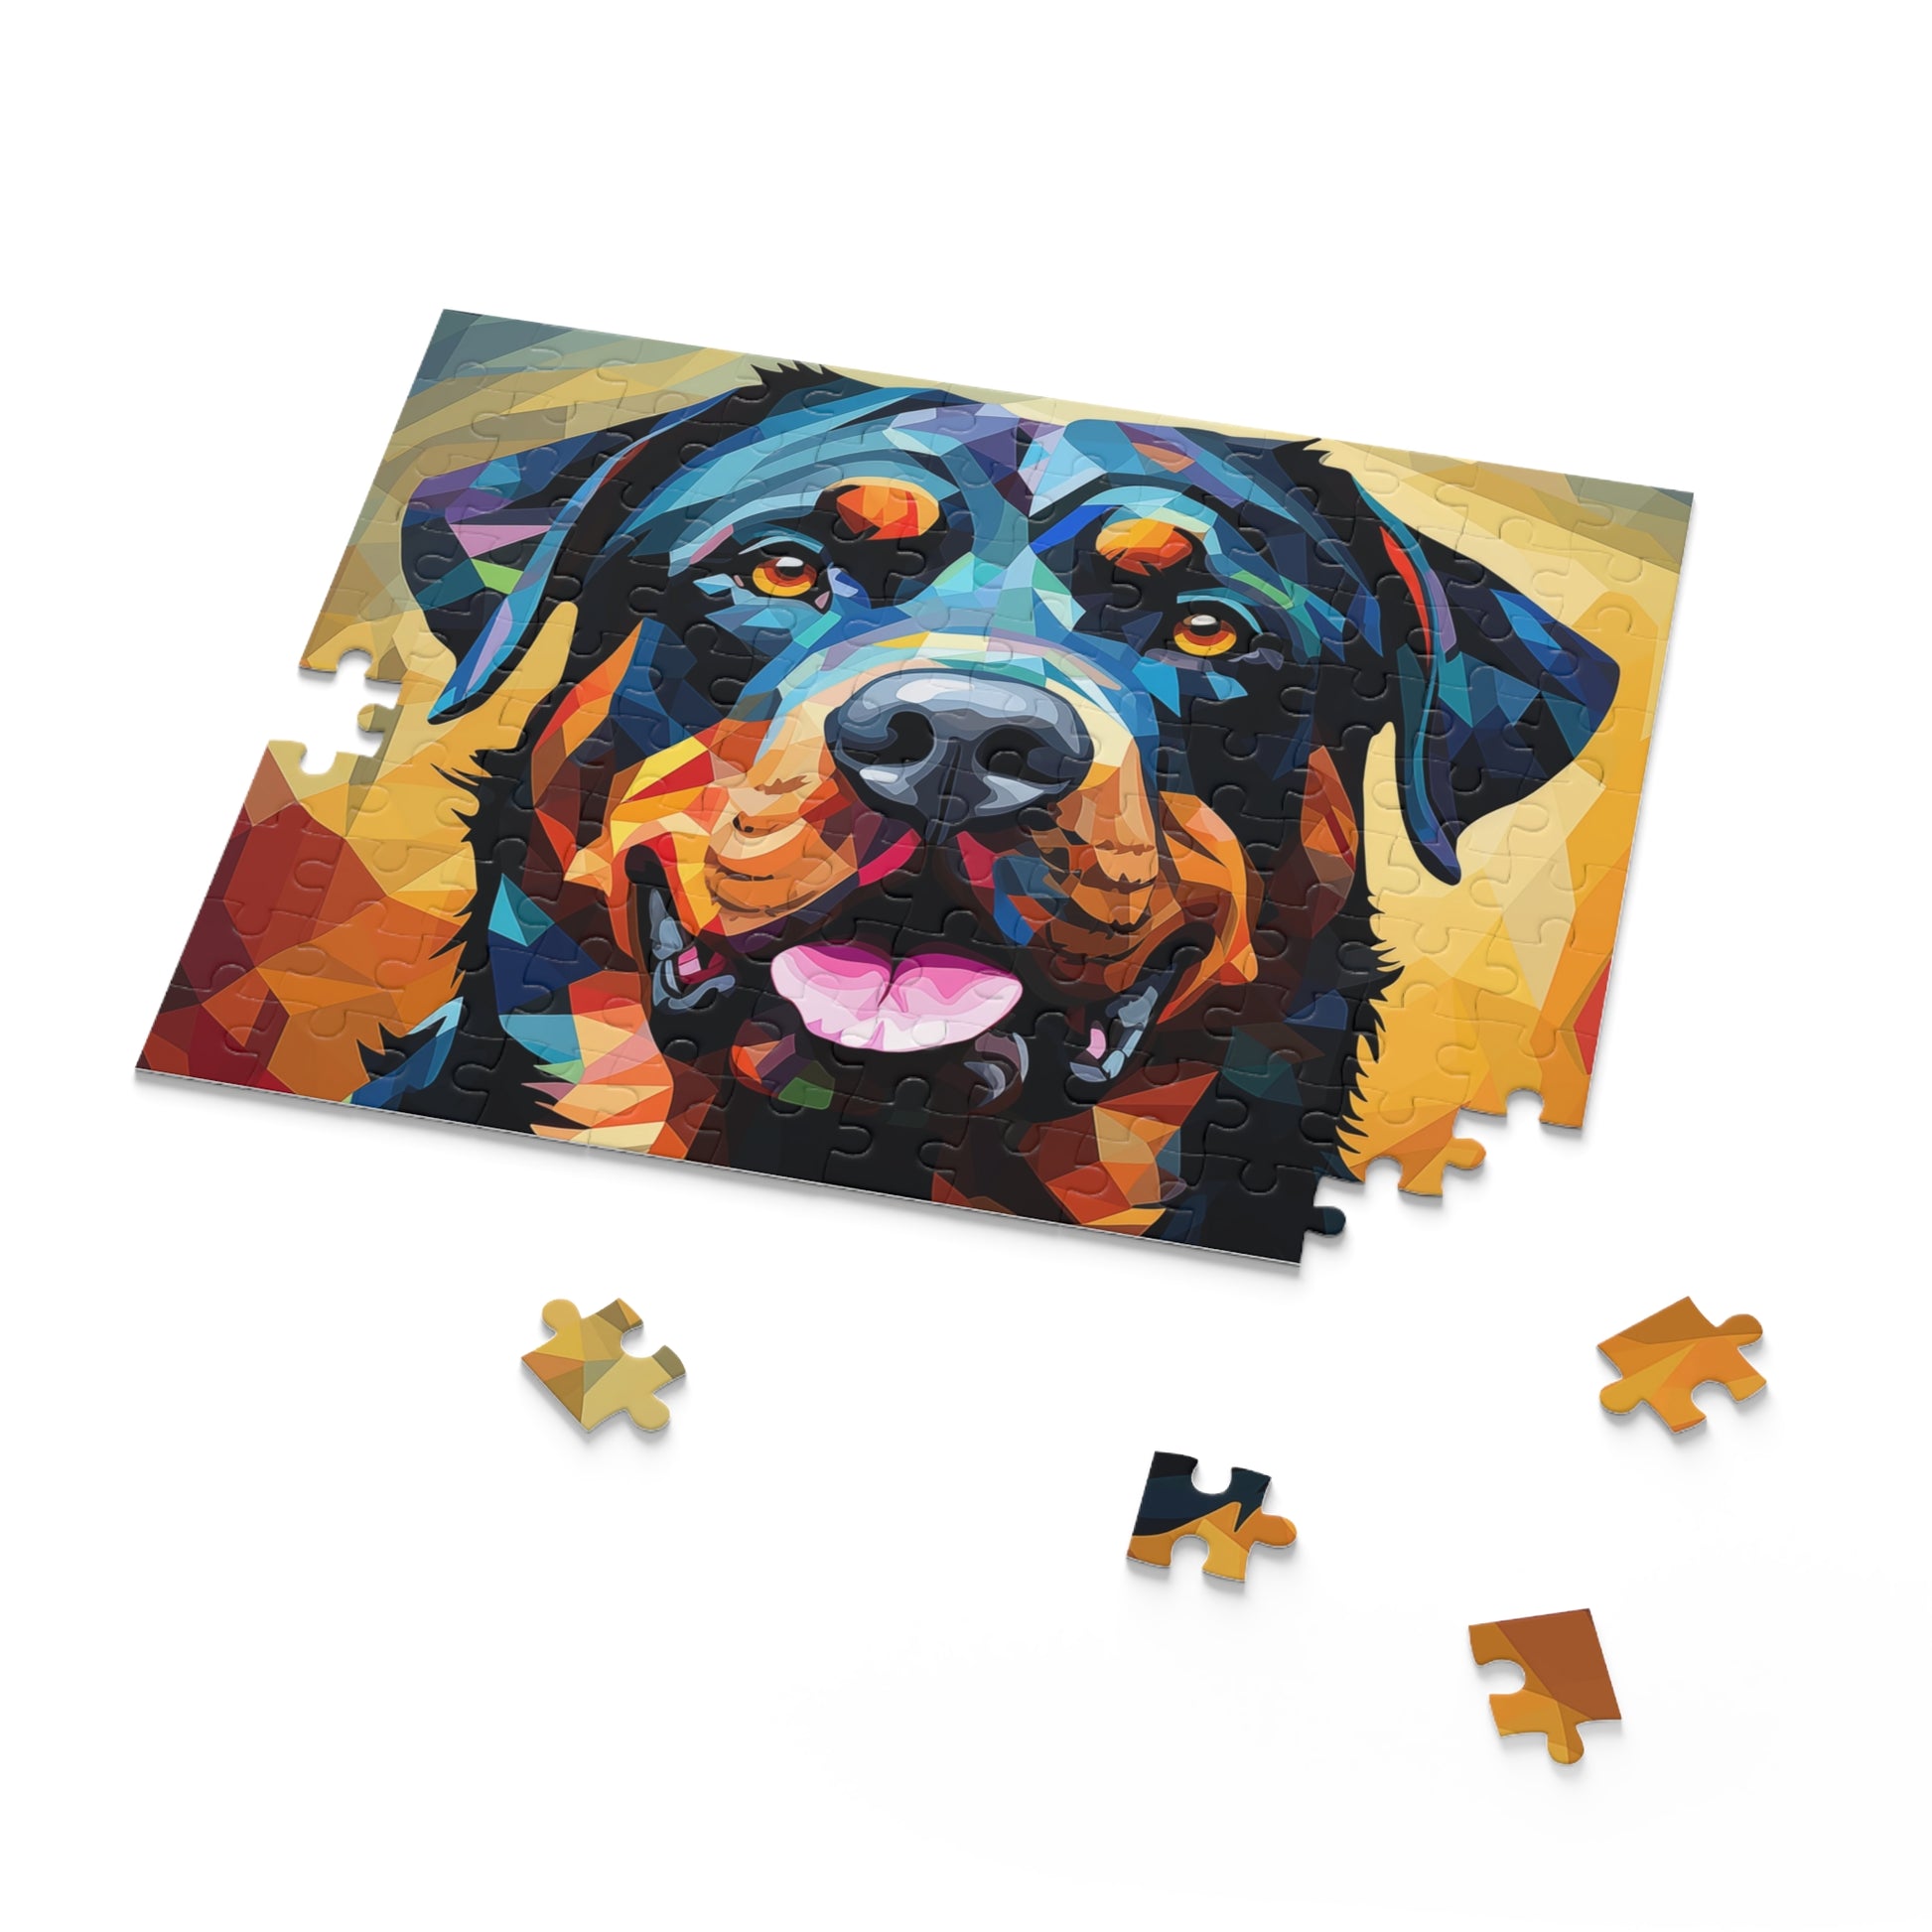 Rottweiler Vibrant Abstract Dog Jigsaw Puzzle Oil Paint Adult Birthday Business Jigsaw Puzzle Gift for Him Funny Humorous Indoor Outdoor Game Gift For Her Online-7